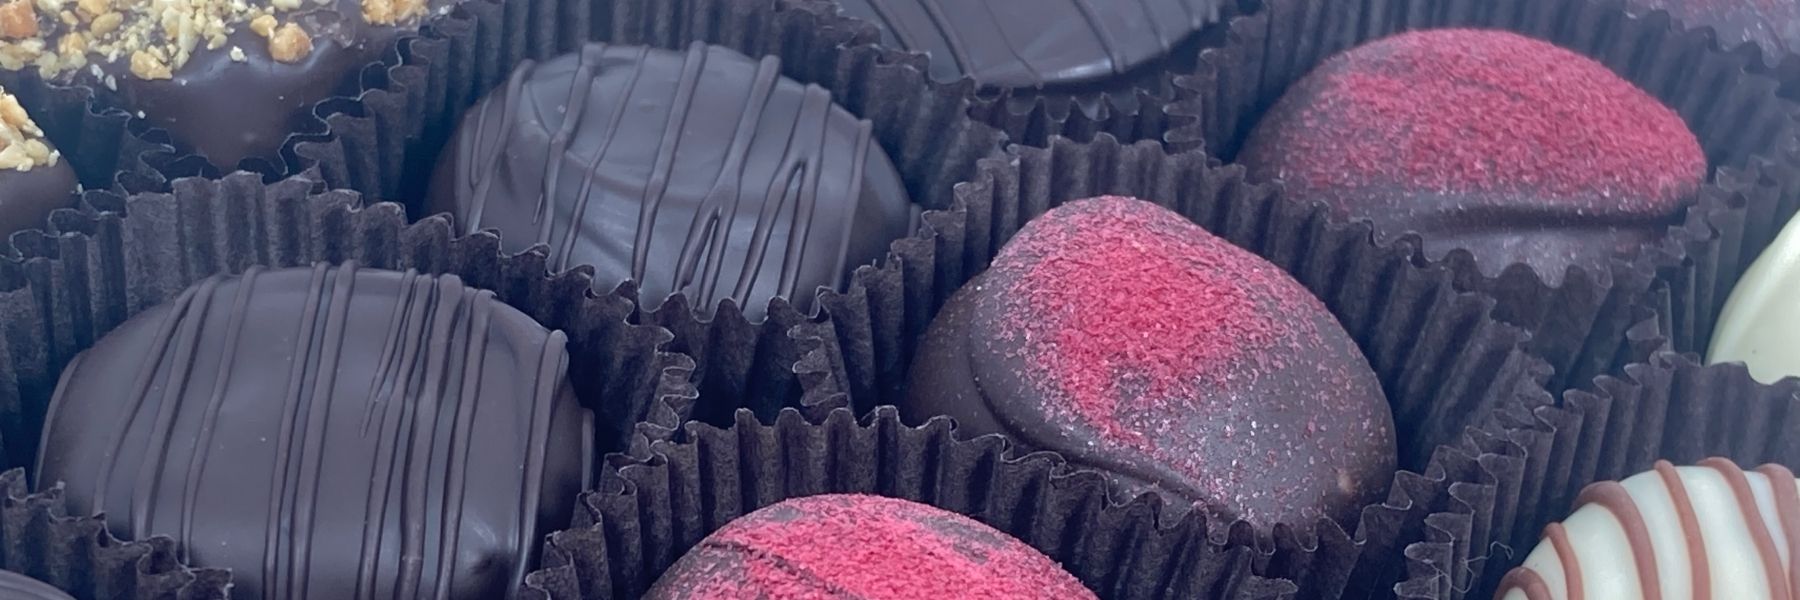 Dilettante Chocolates Truffle Picture Close-Up Blog Banner